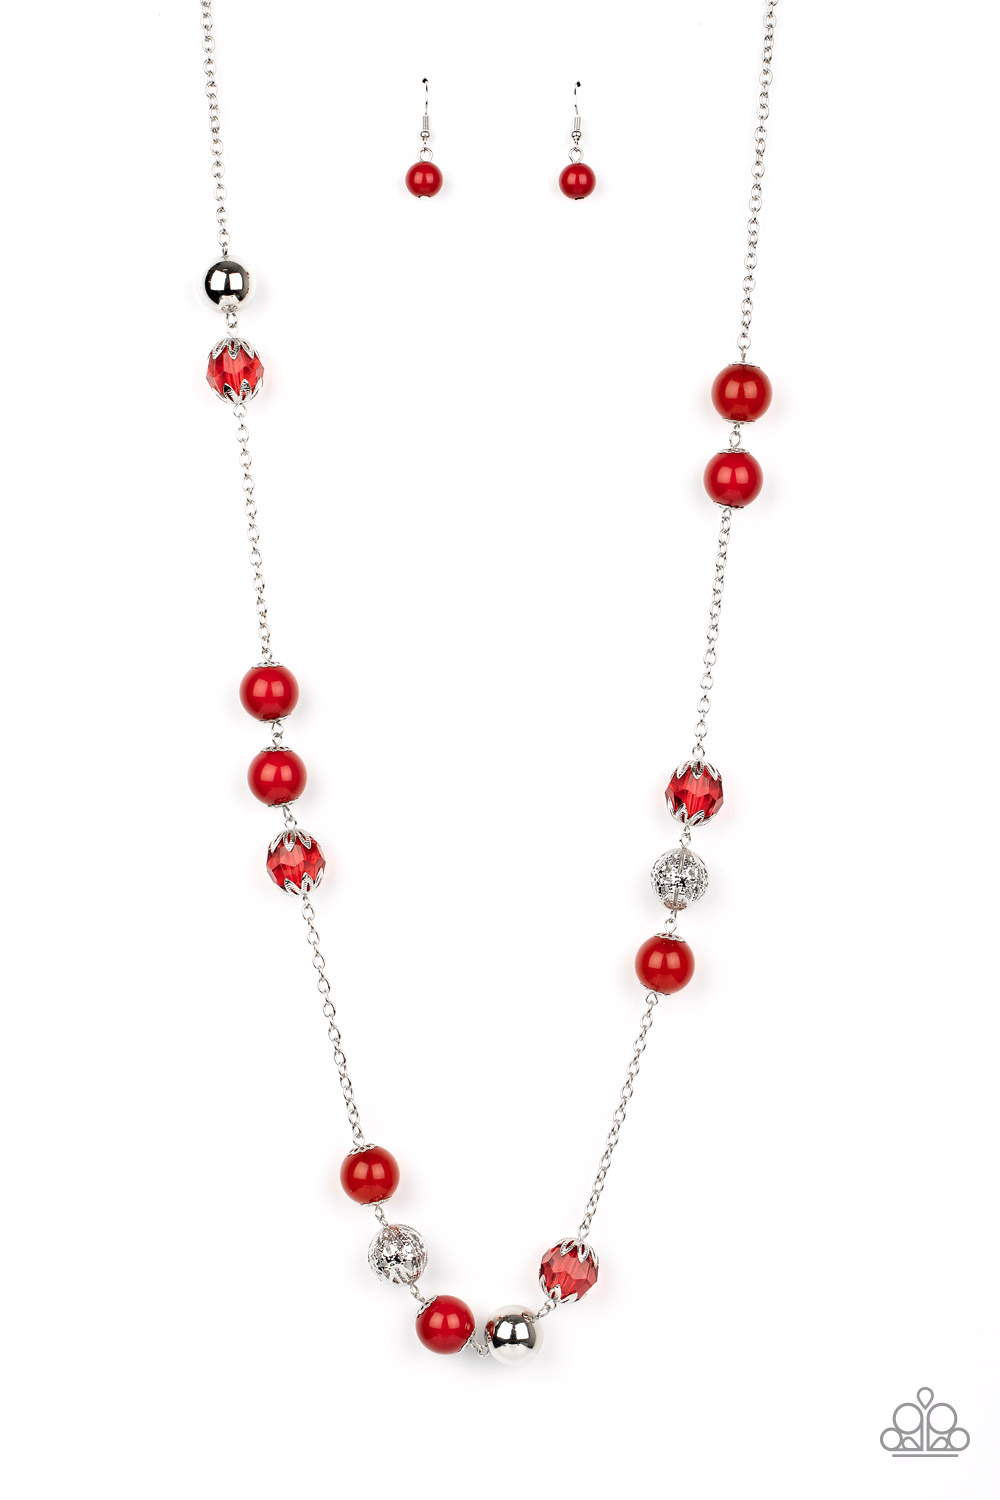 Necklace - Fruity Fashion - Red